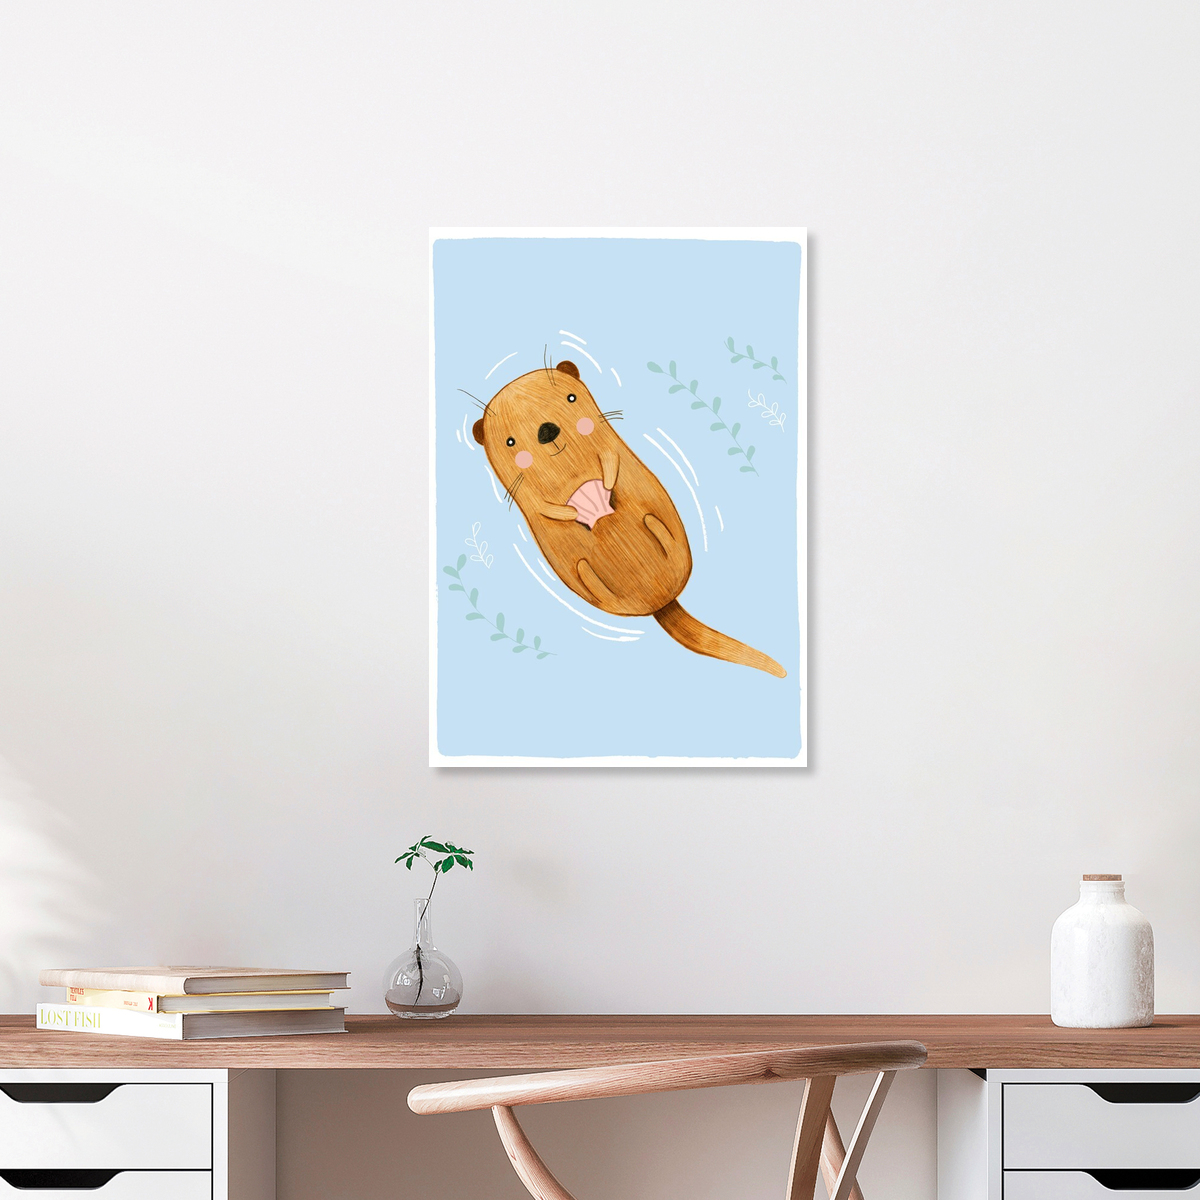 The Artcircle wall art - 'Otter by Judith Loske' | Photocircle.net